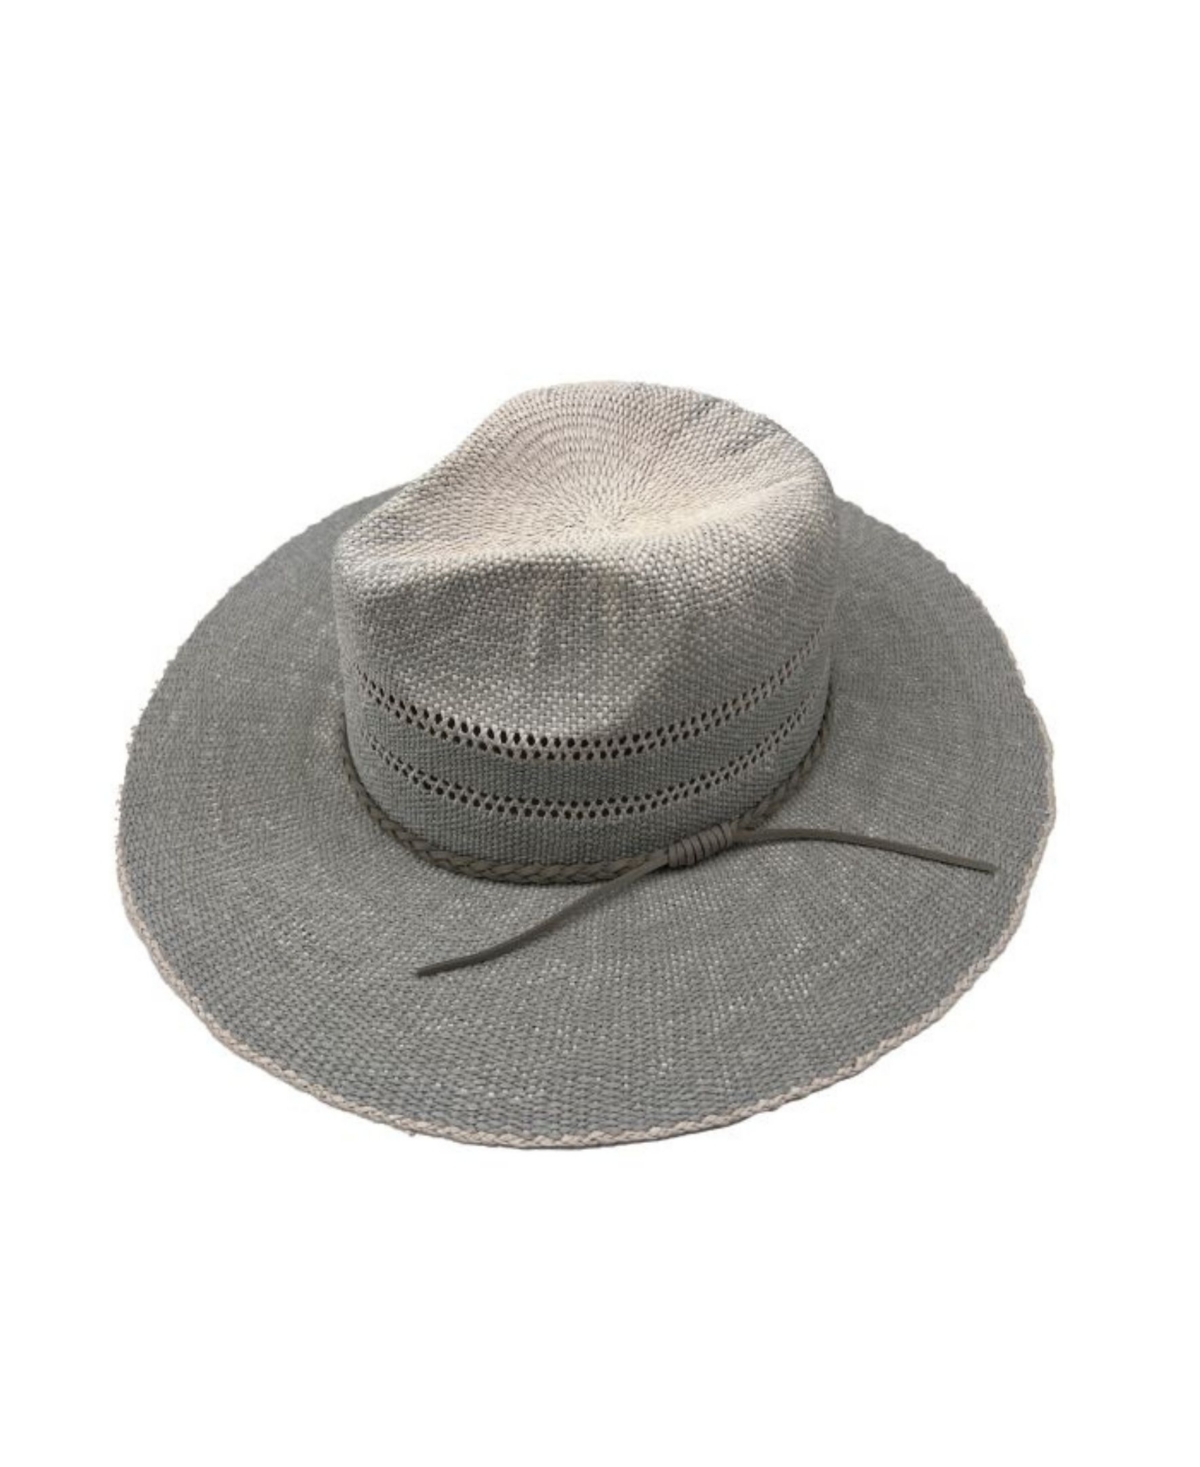 Faux Suede Braided Trim with Straw Panama Hat - Taupe